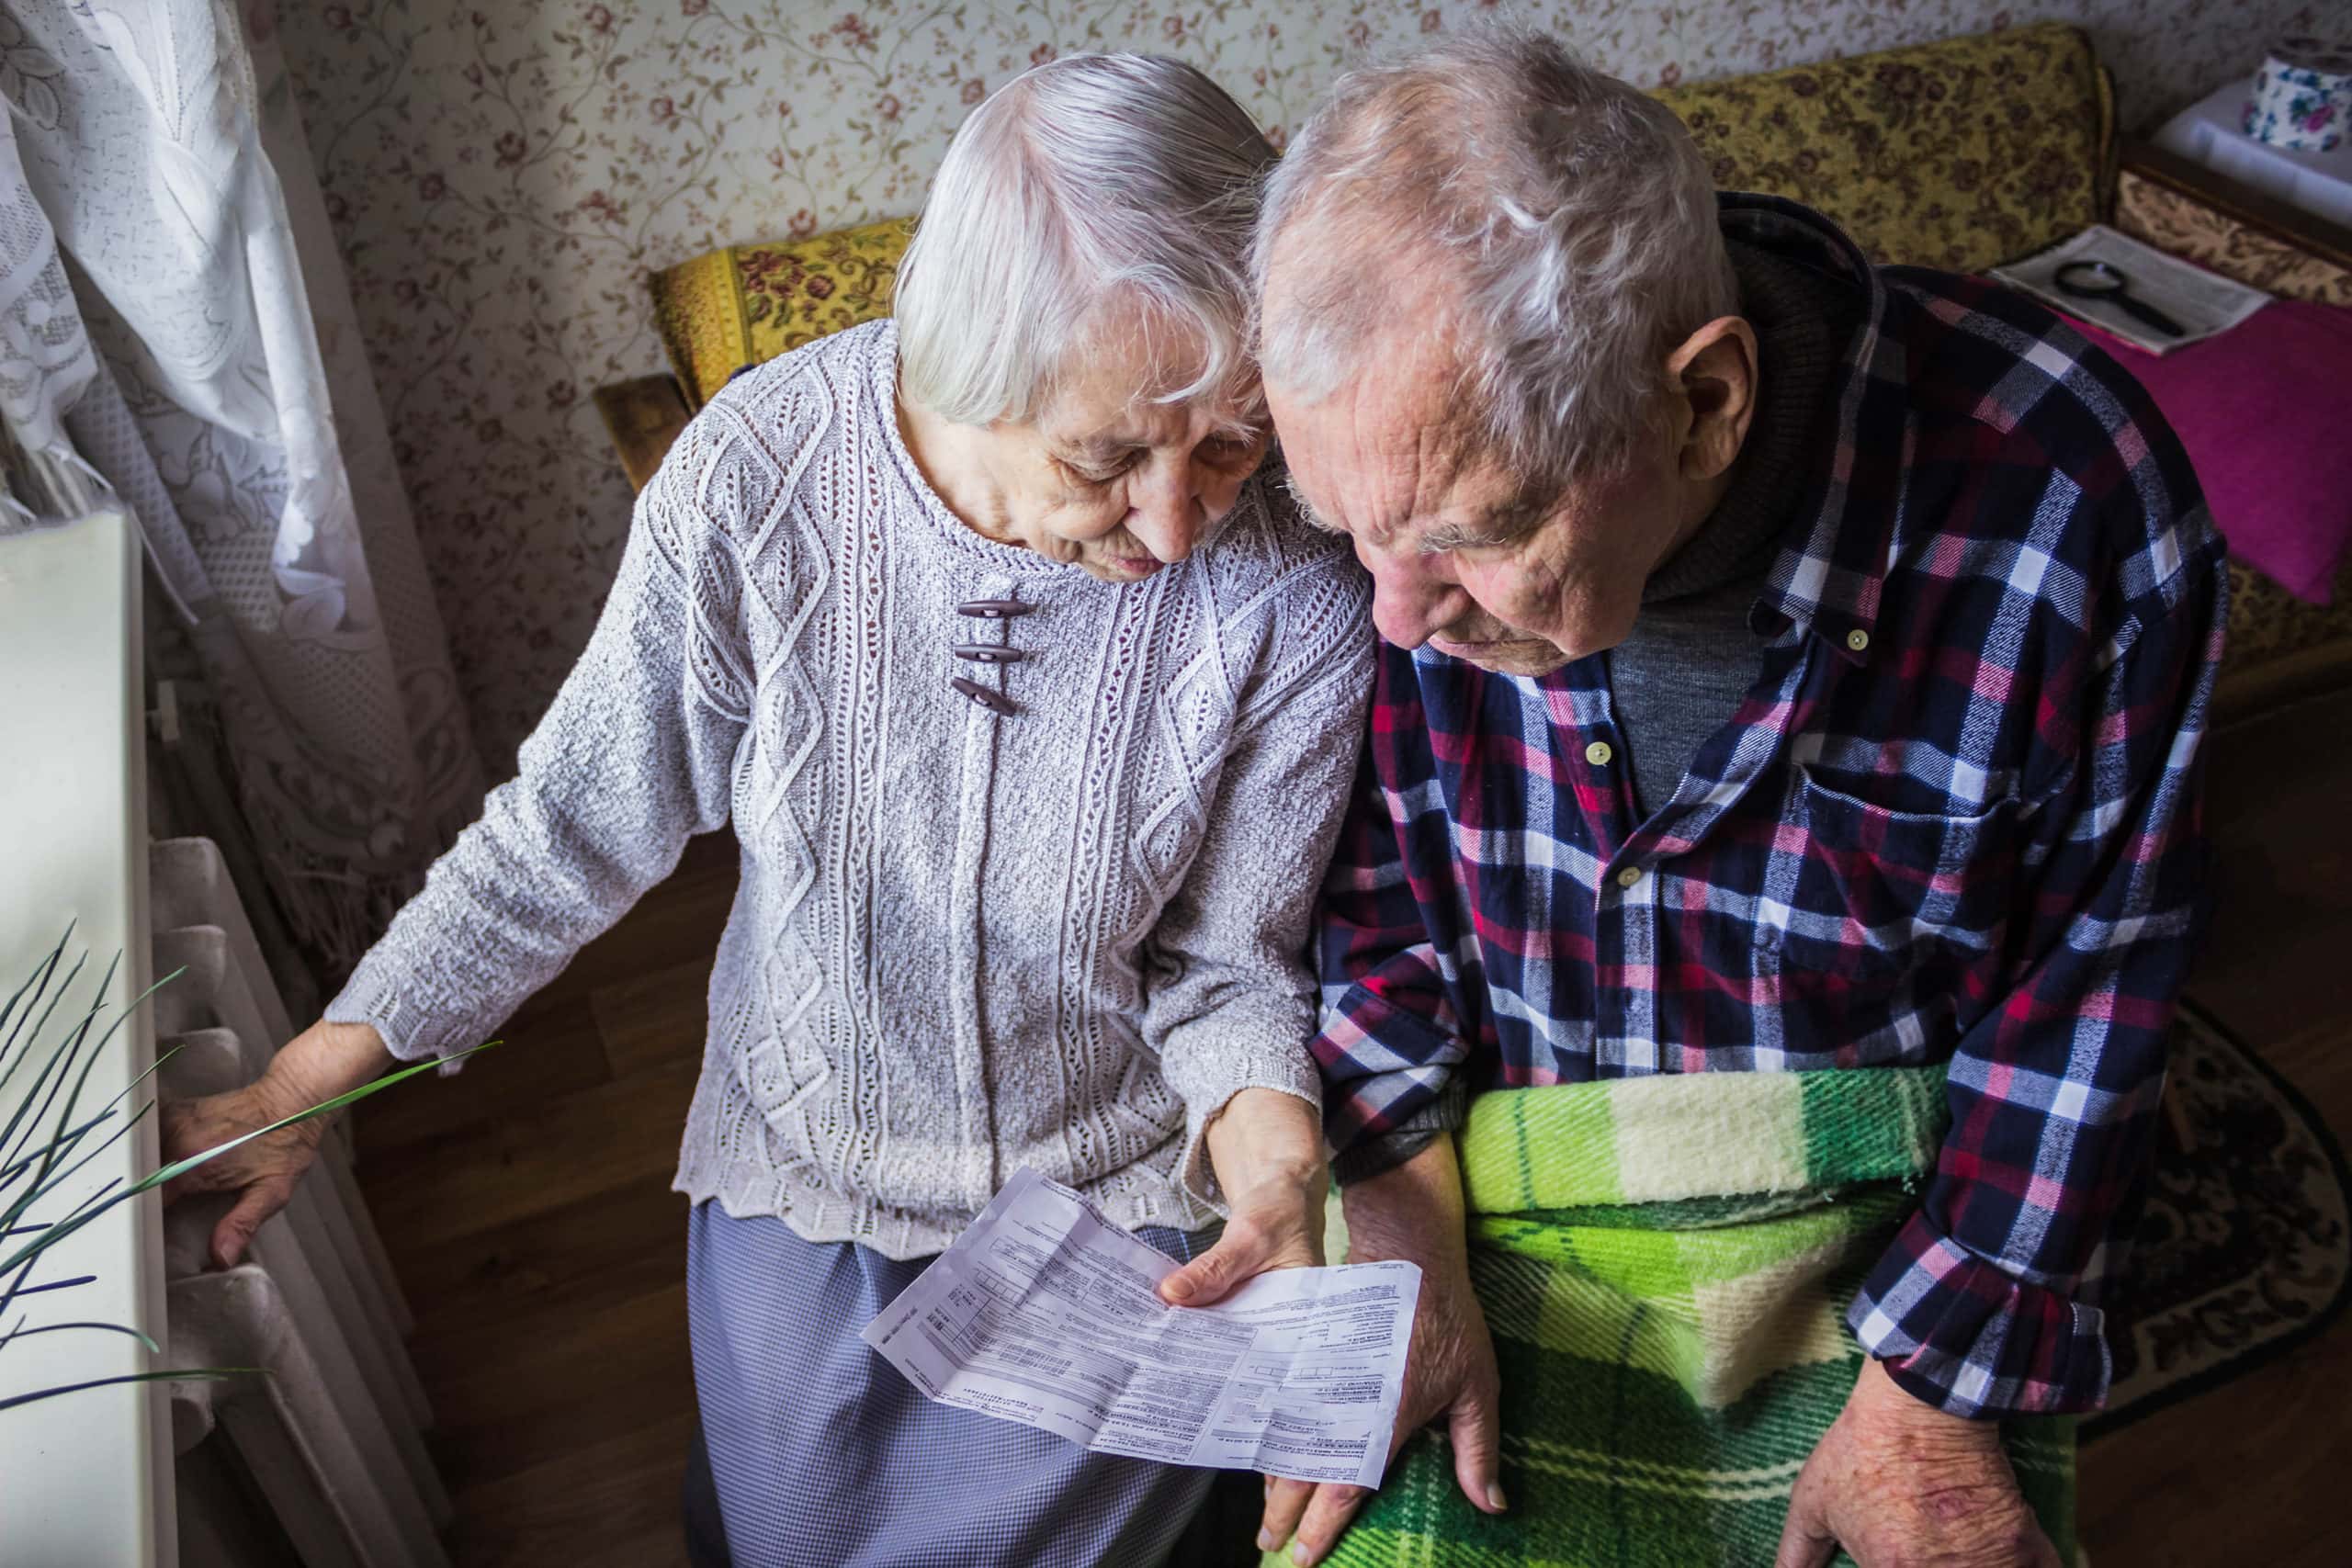 The senior woman and man holding gas bill in front of heating radiator. Payment for heating in winter.